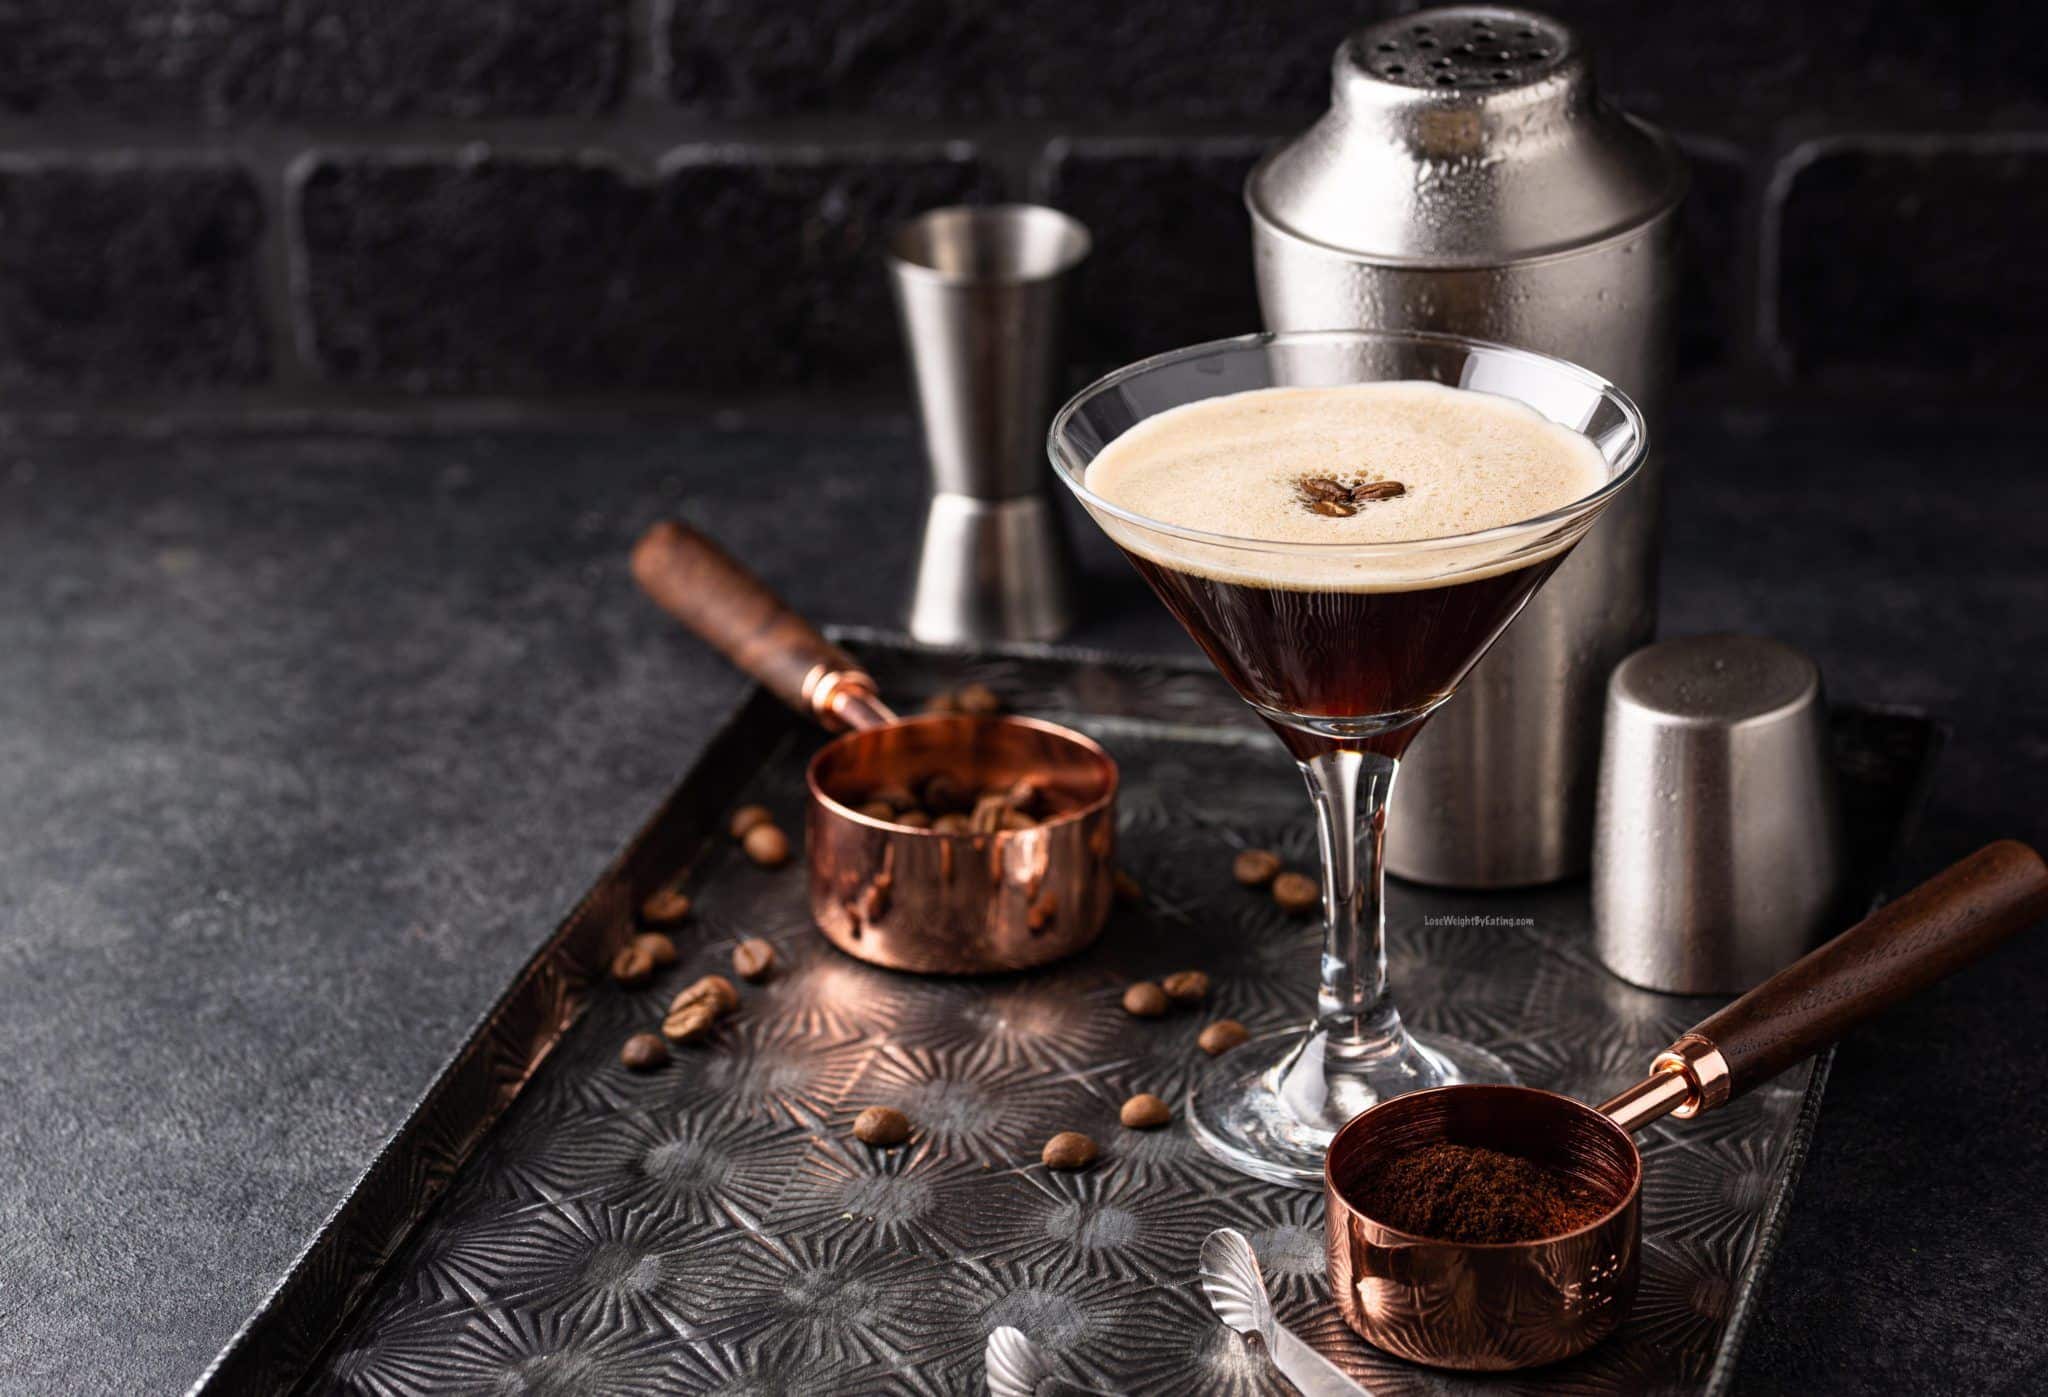 An espresso martini cocktail on a tray with measuring cups filled with ground and whole coffee beans and a cocktail shaker